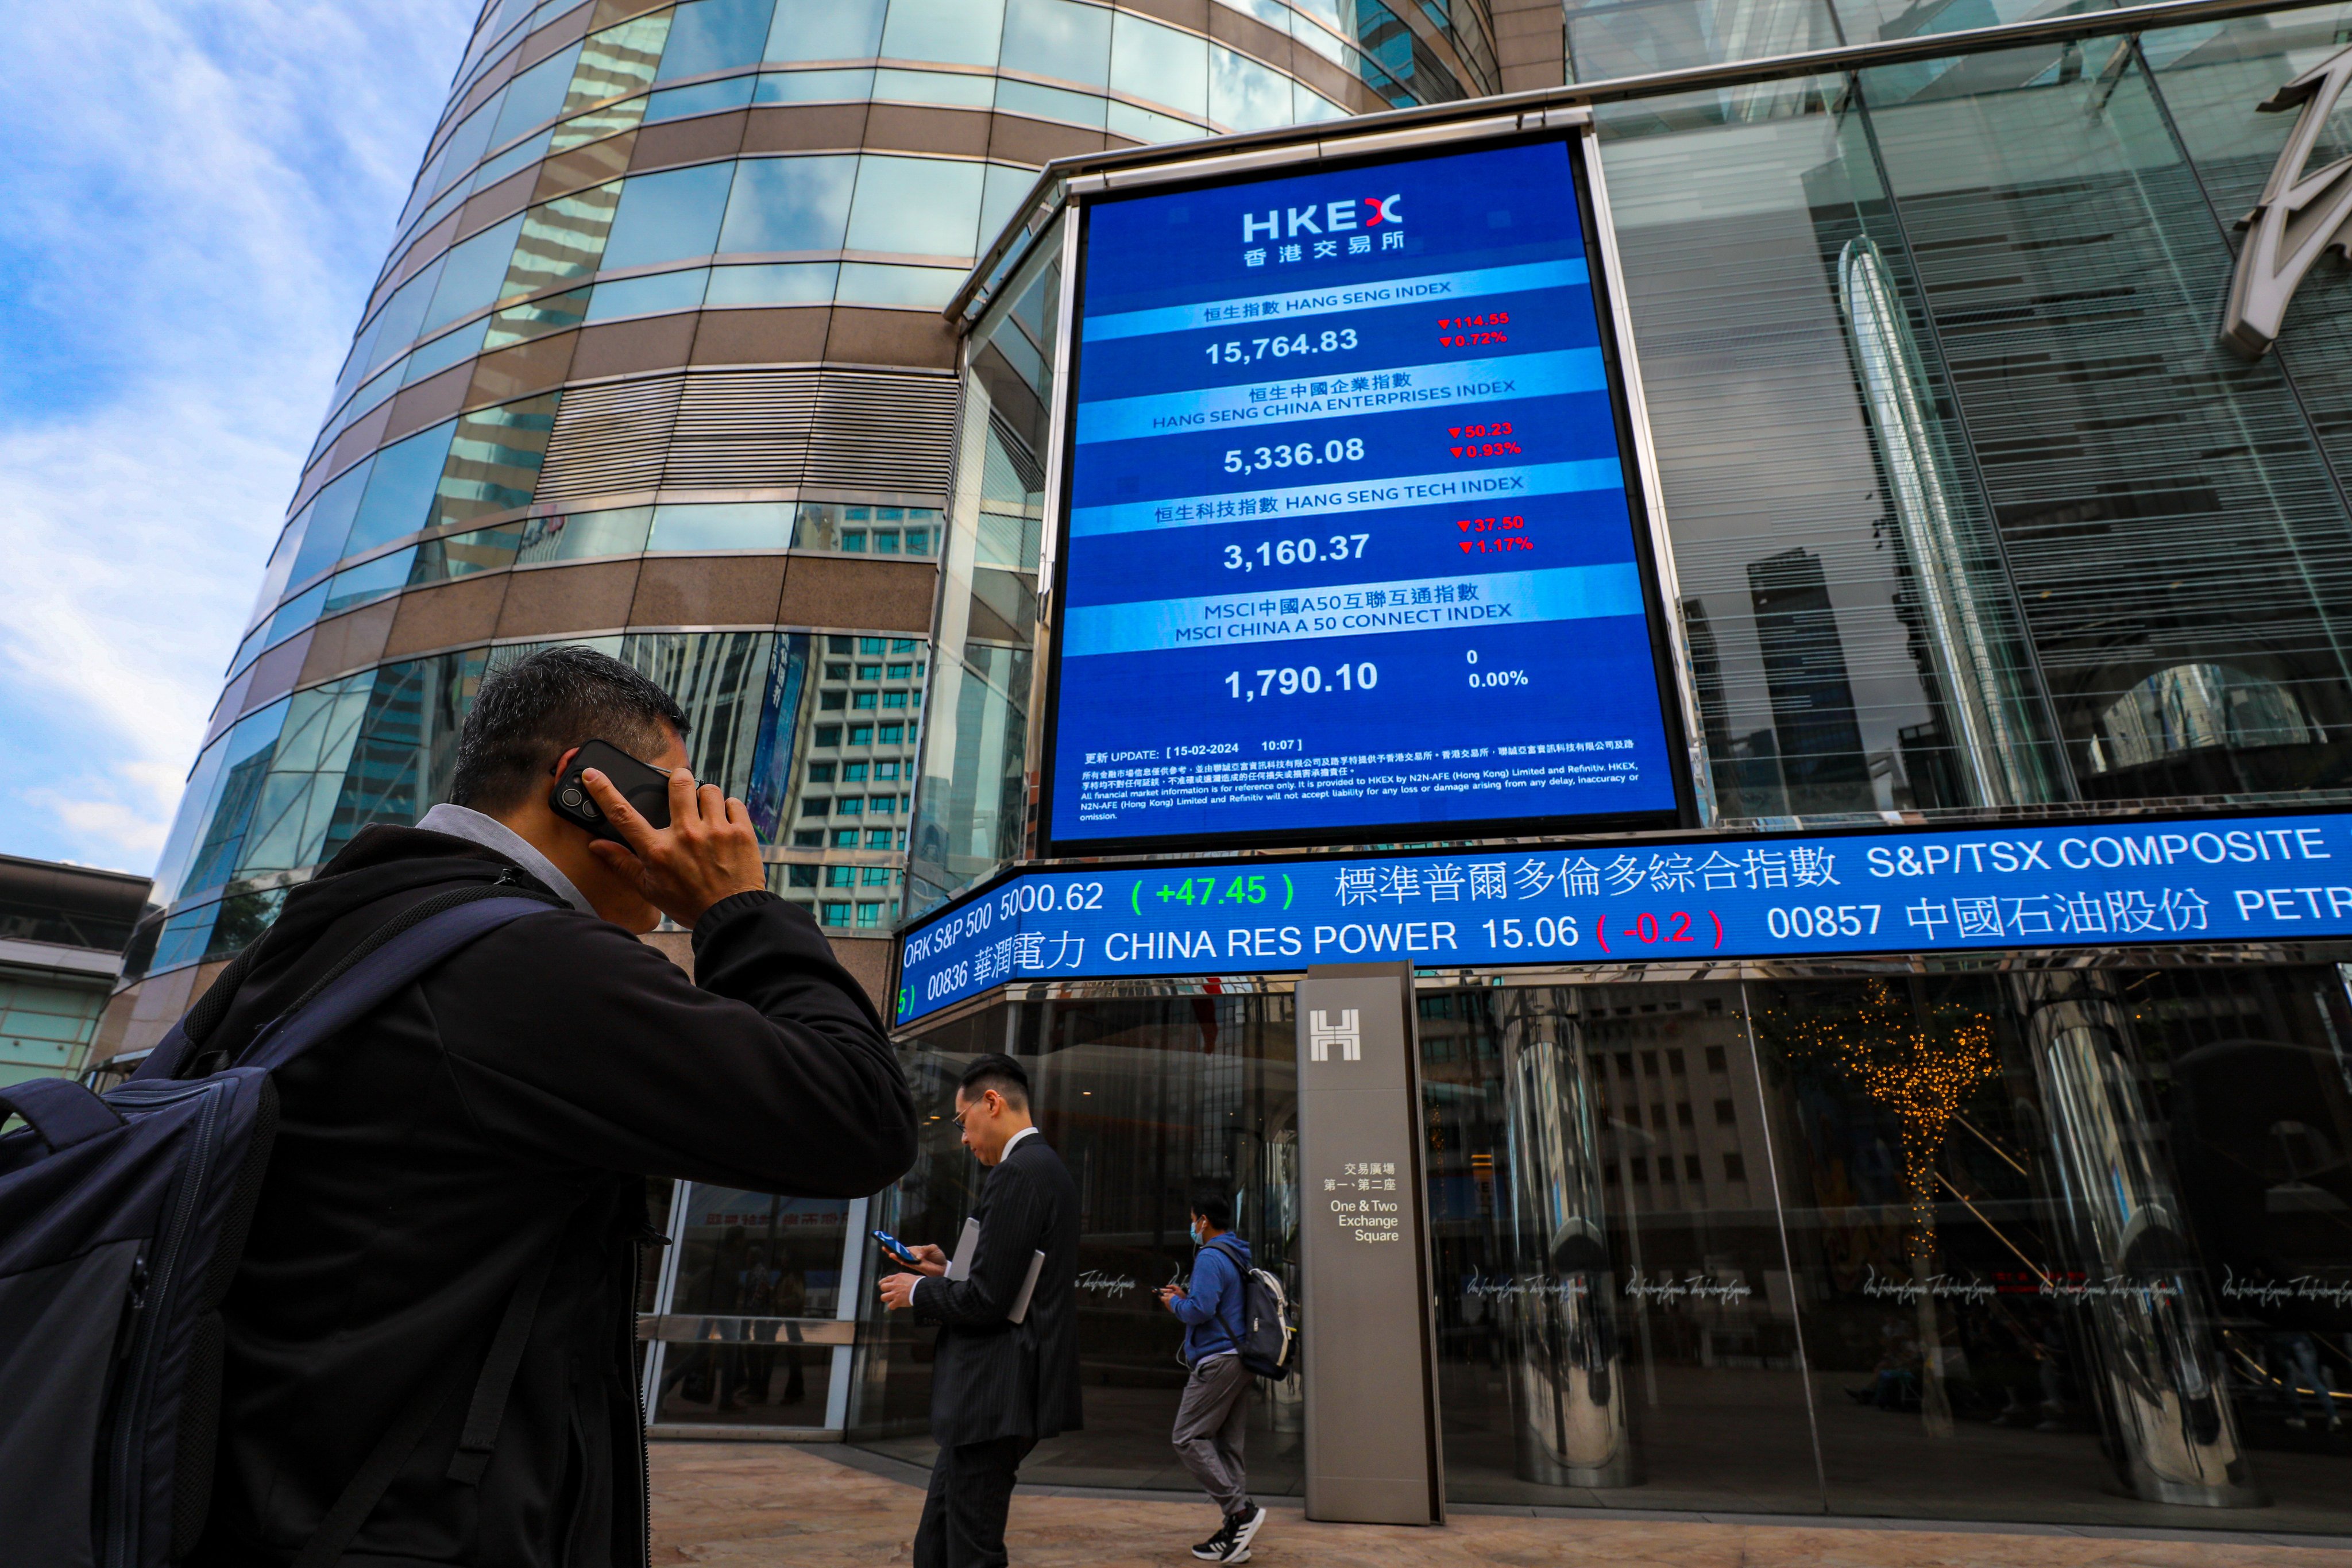 Screens showing the index and stock prices outside Hong Kong Exchange Square (HKEX) in Central. Photo: Sun Yeung